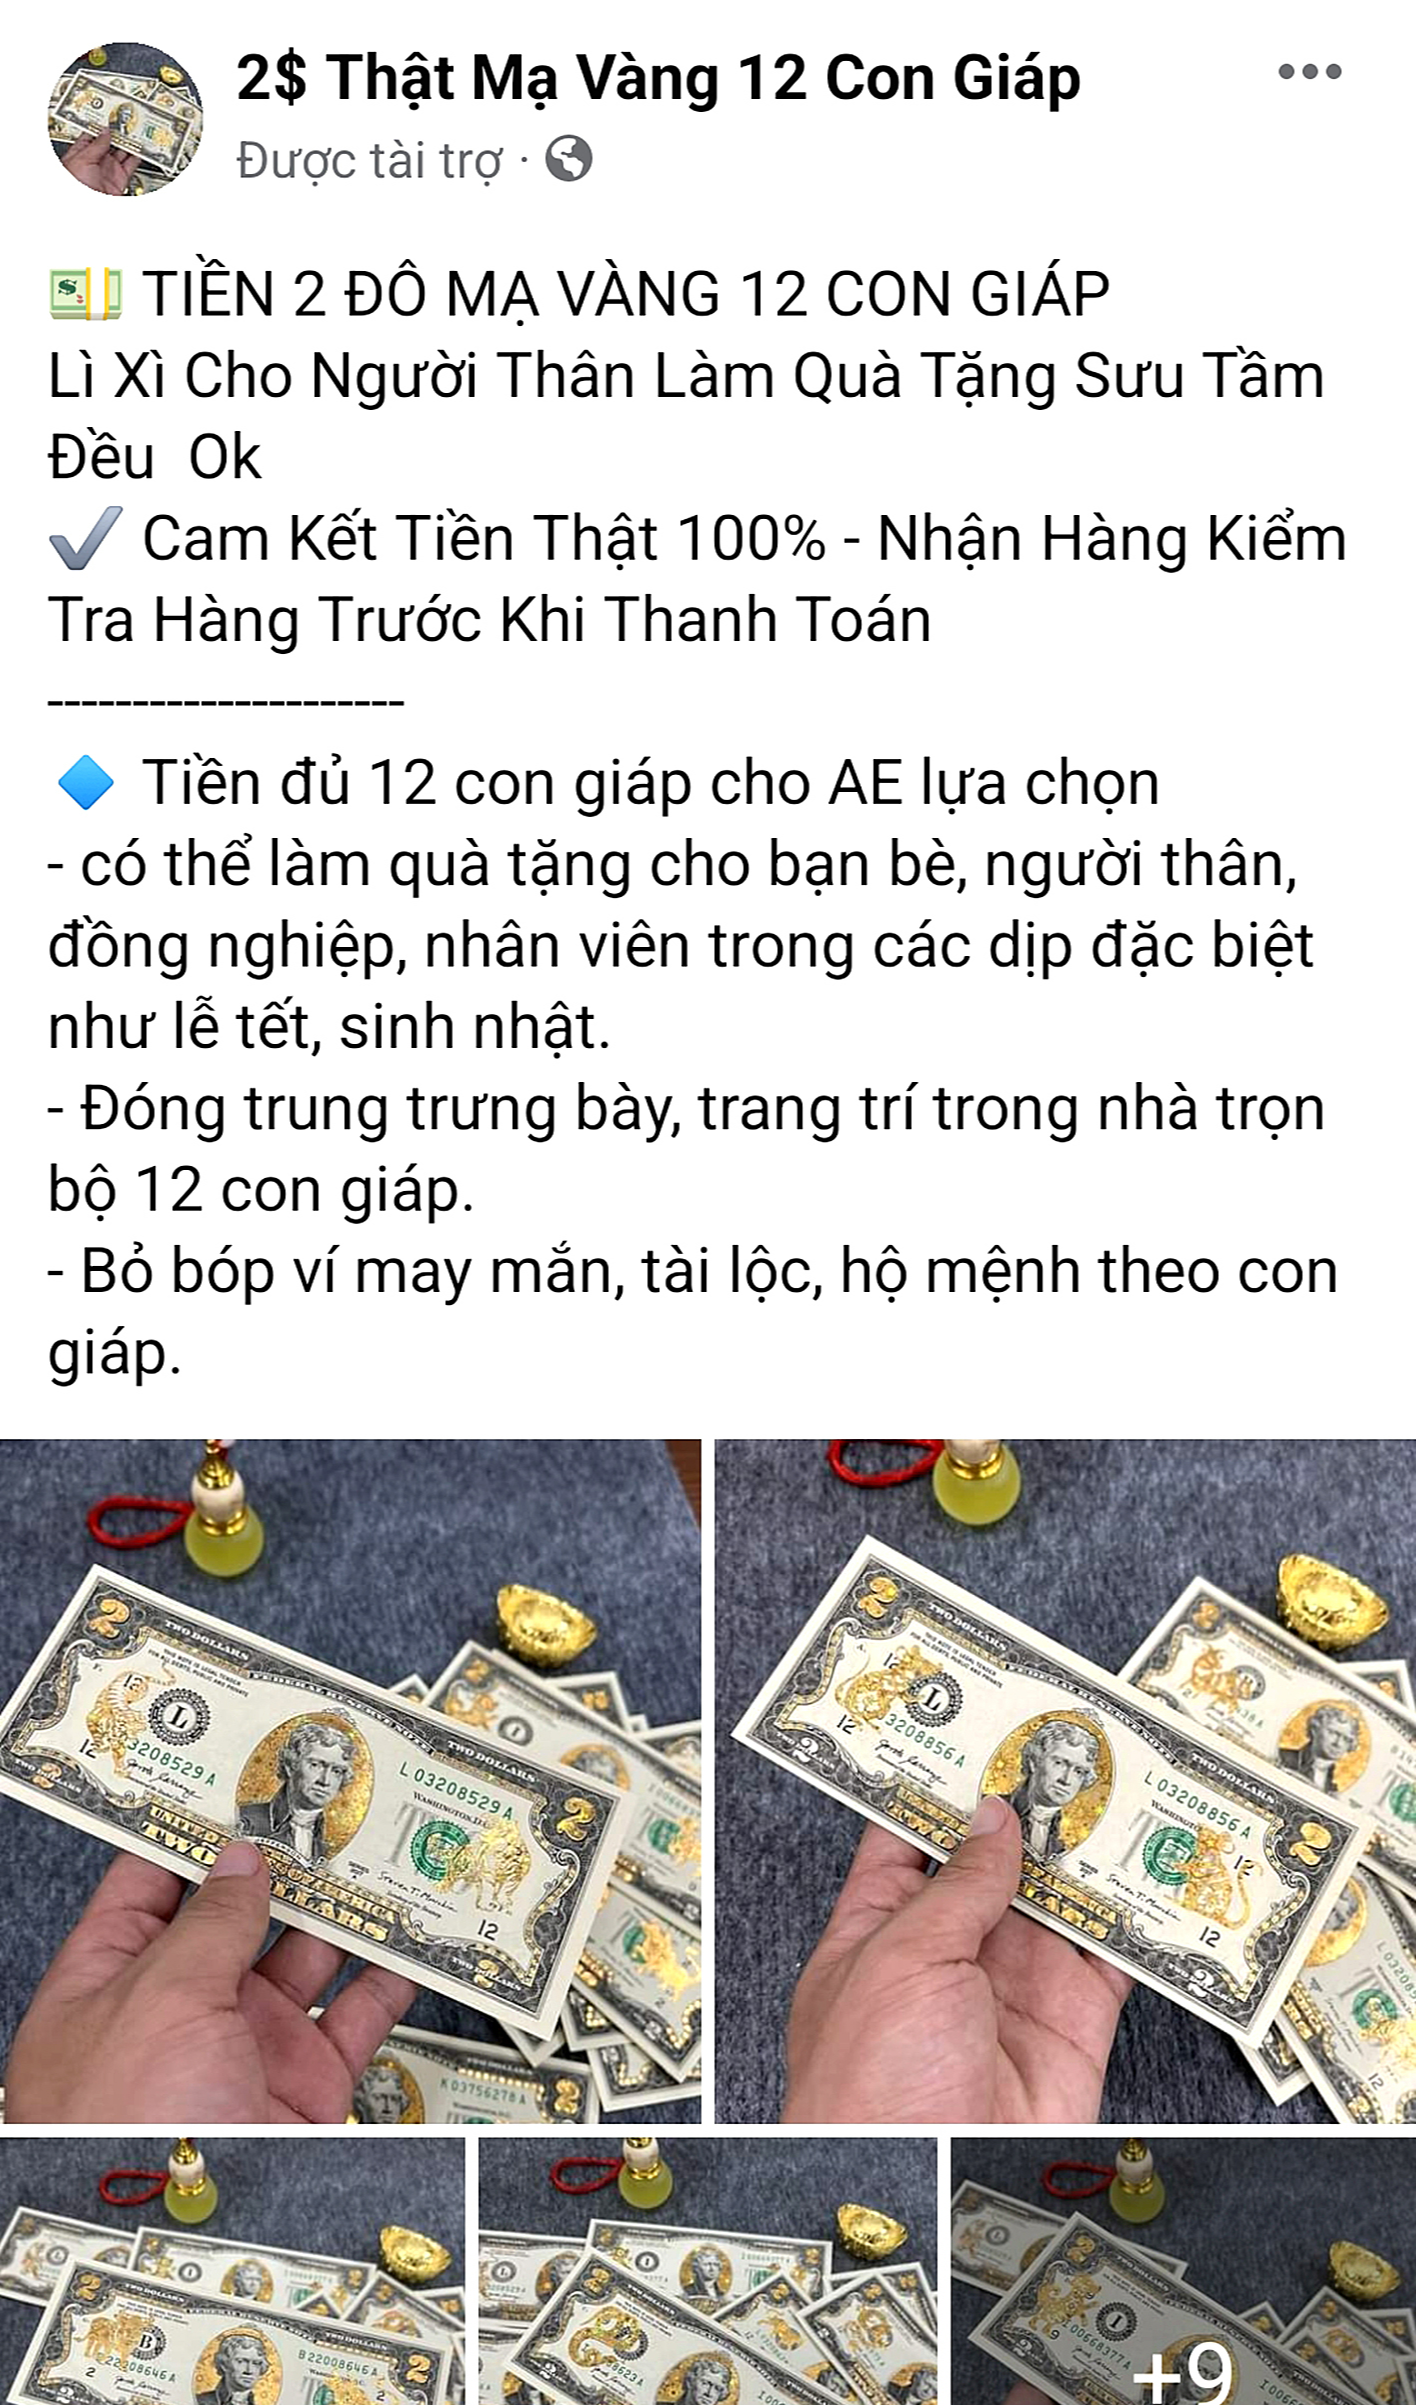 A Facebook page offers gilded .S. dollar banknotes as lucky money.